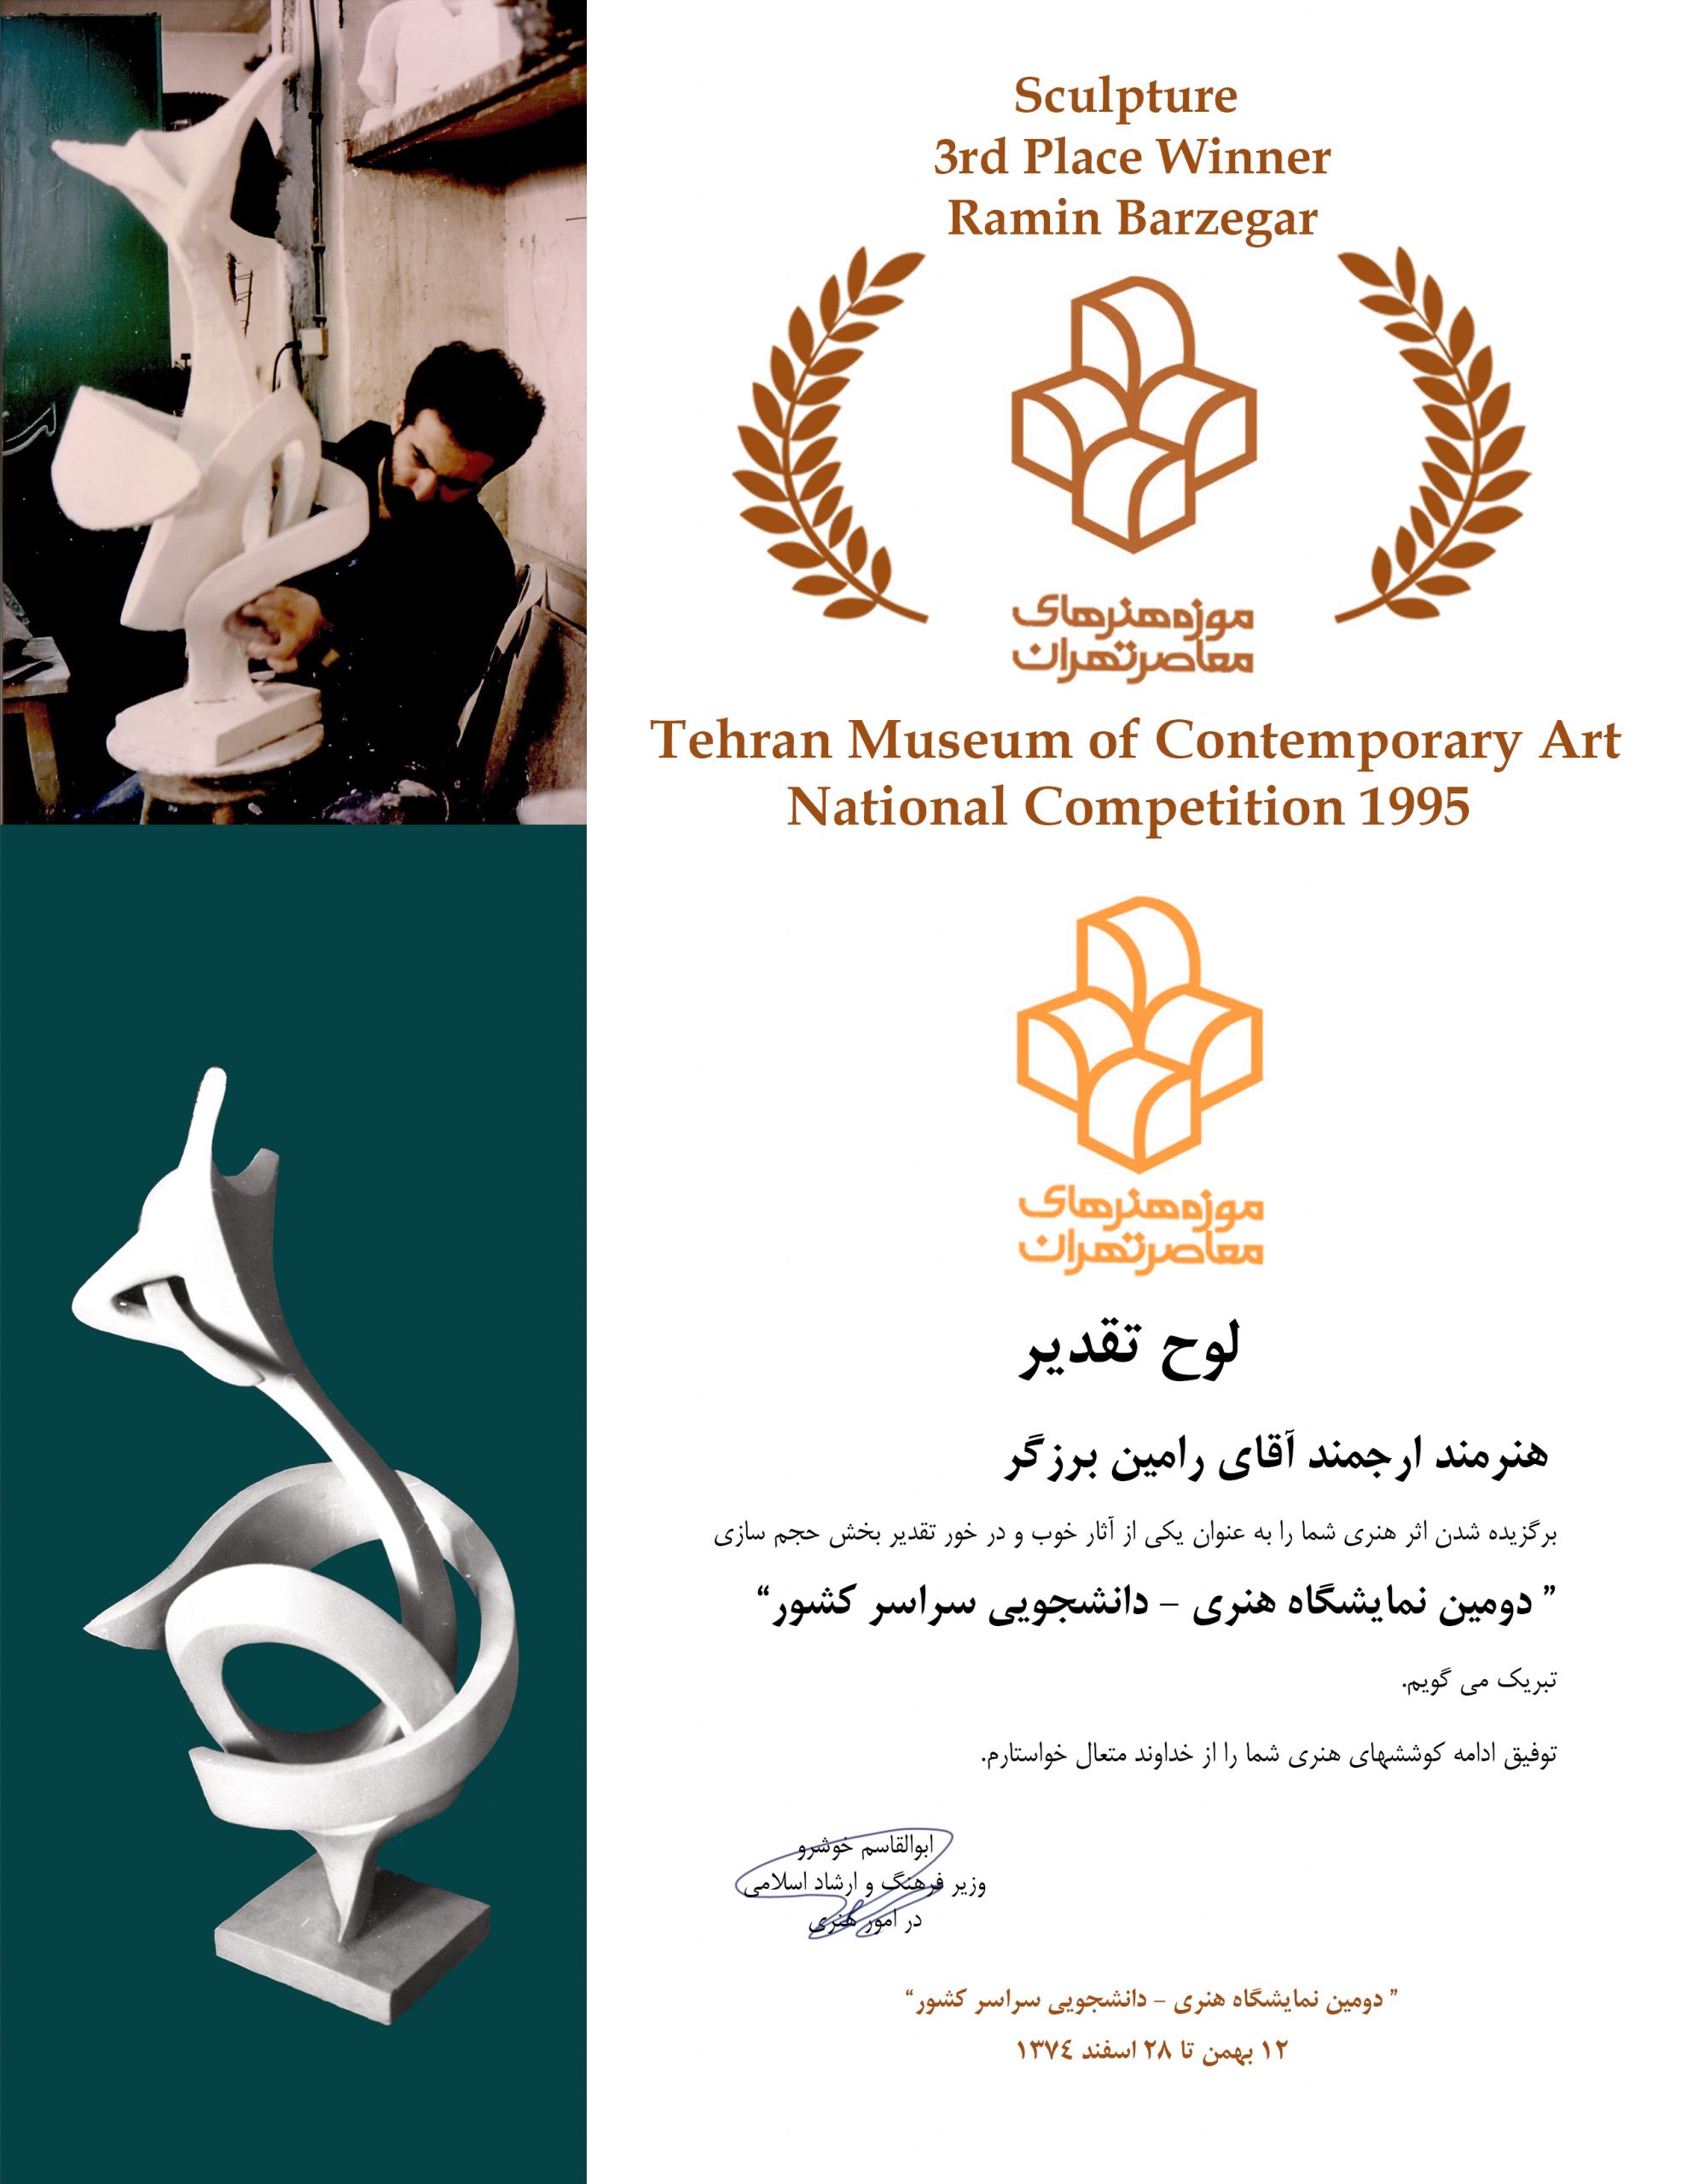 Tehran Museum of Contemporary Art
National Competition 1995 